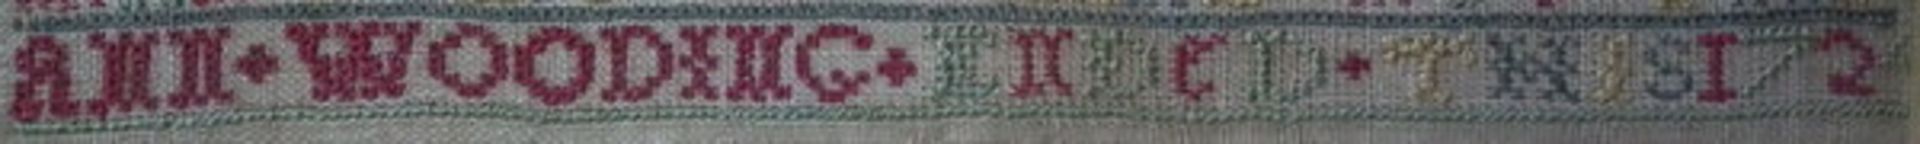 Needlework Band Sampler dated 1724 by Ann Wooding - FREE UK DELIVERY - Image 6 of 20